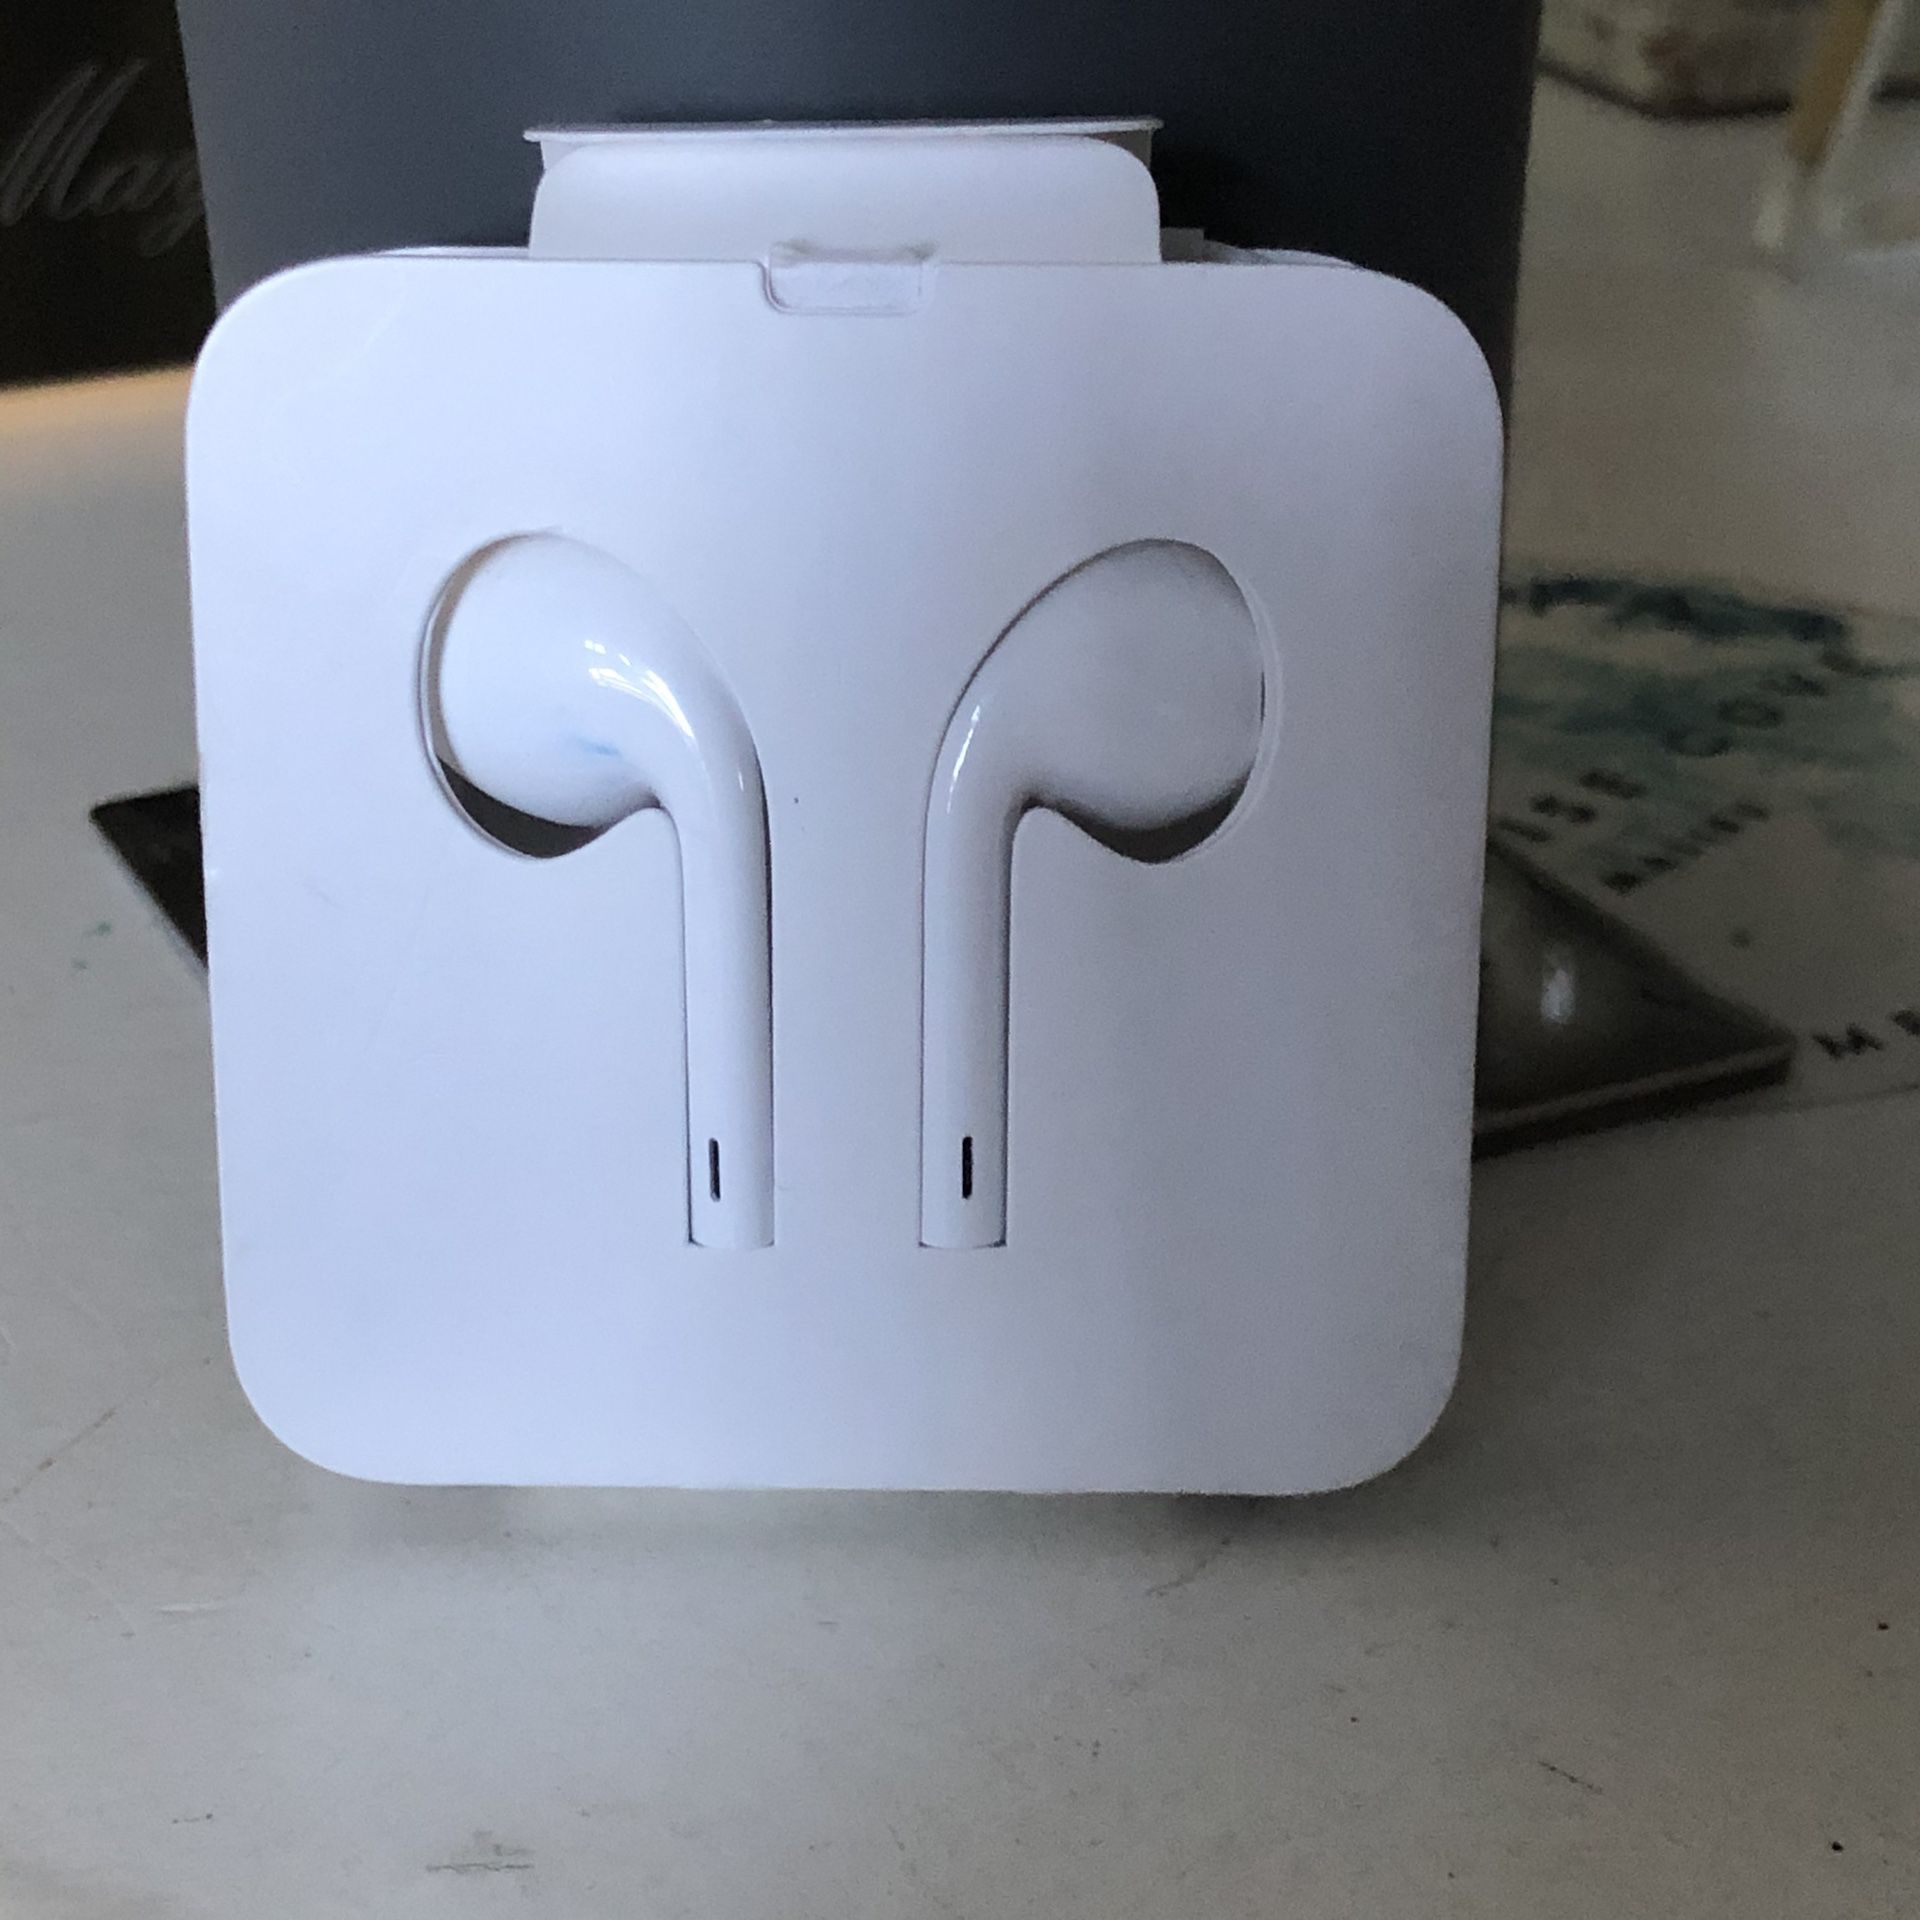 Apple earbuds wired